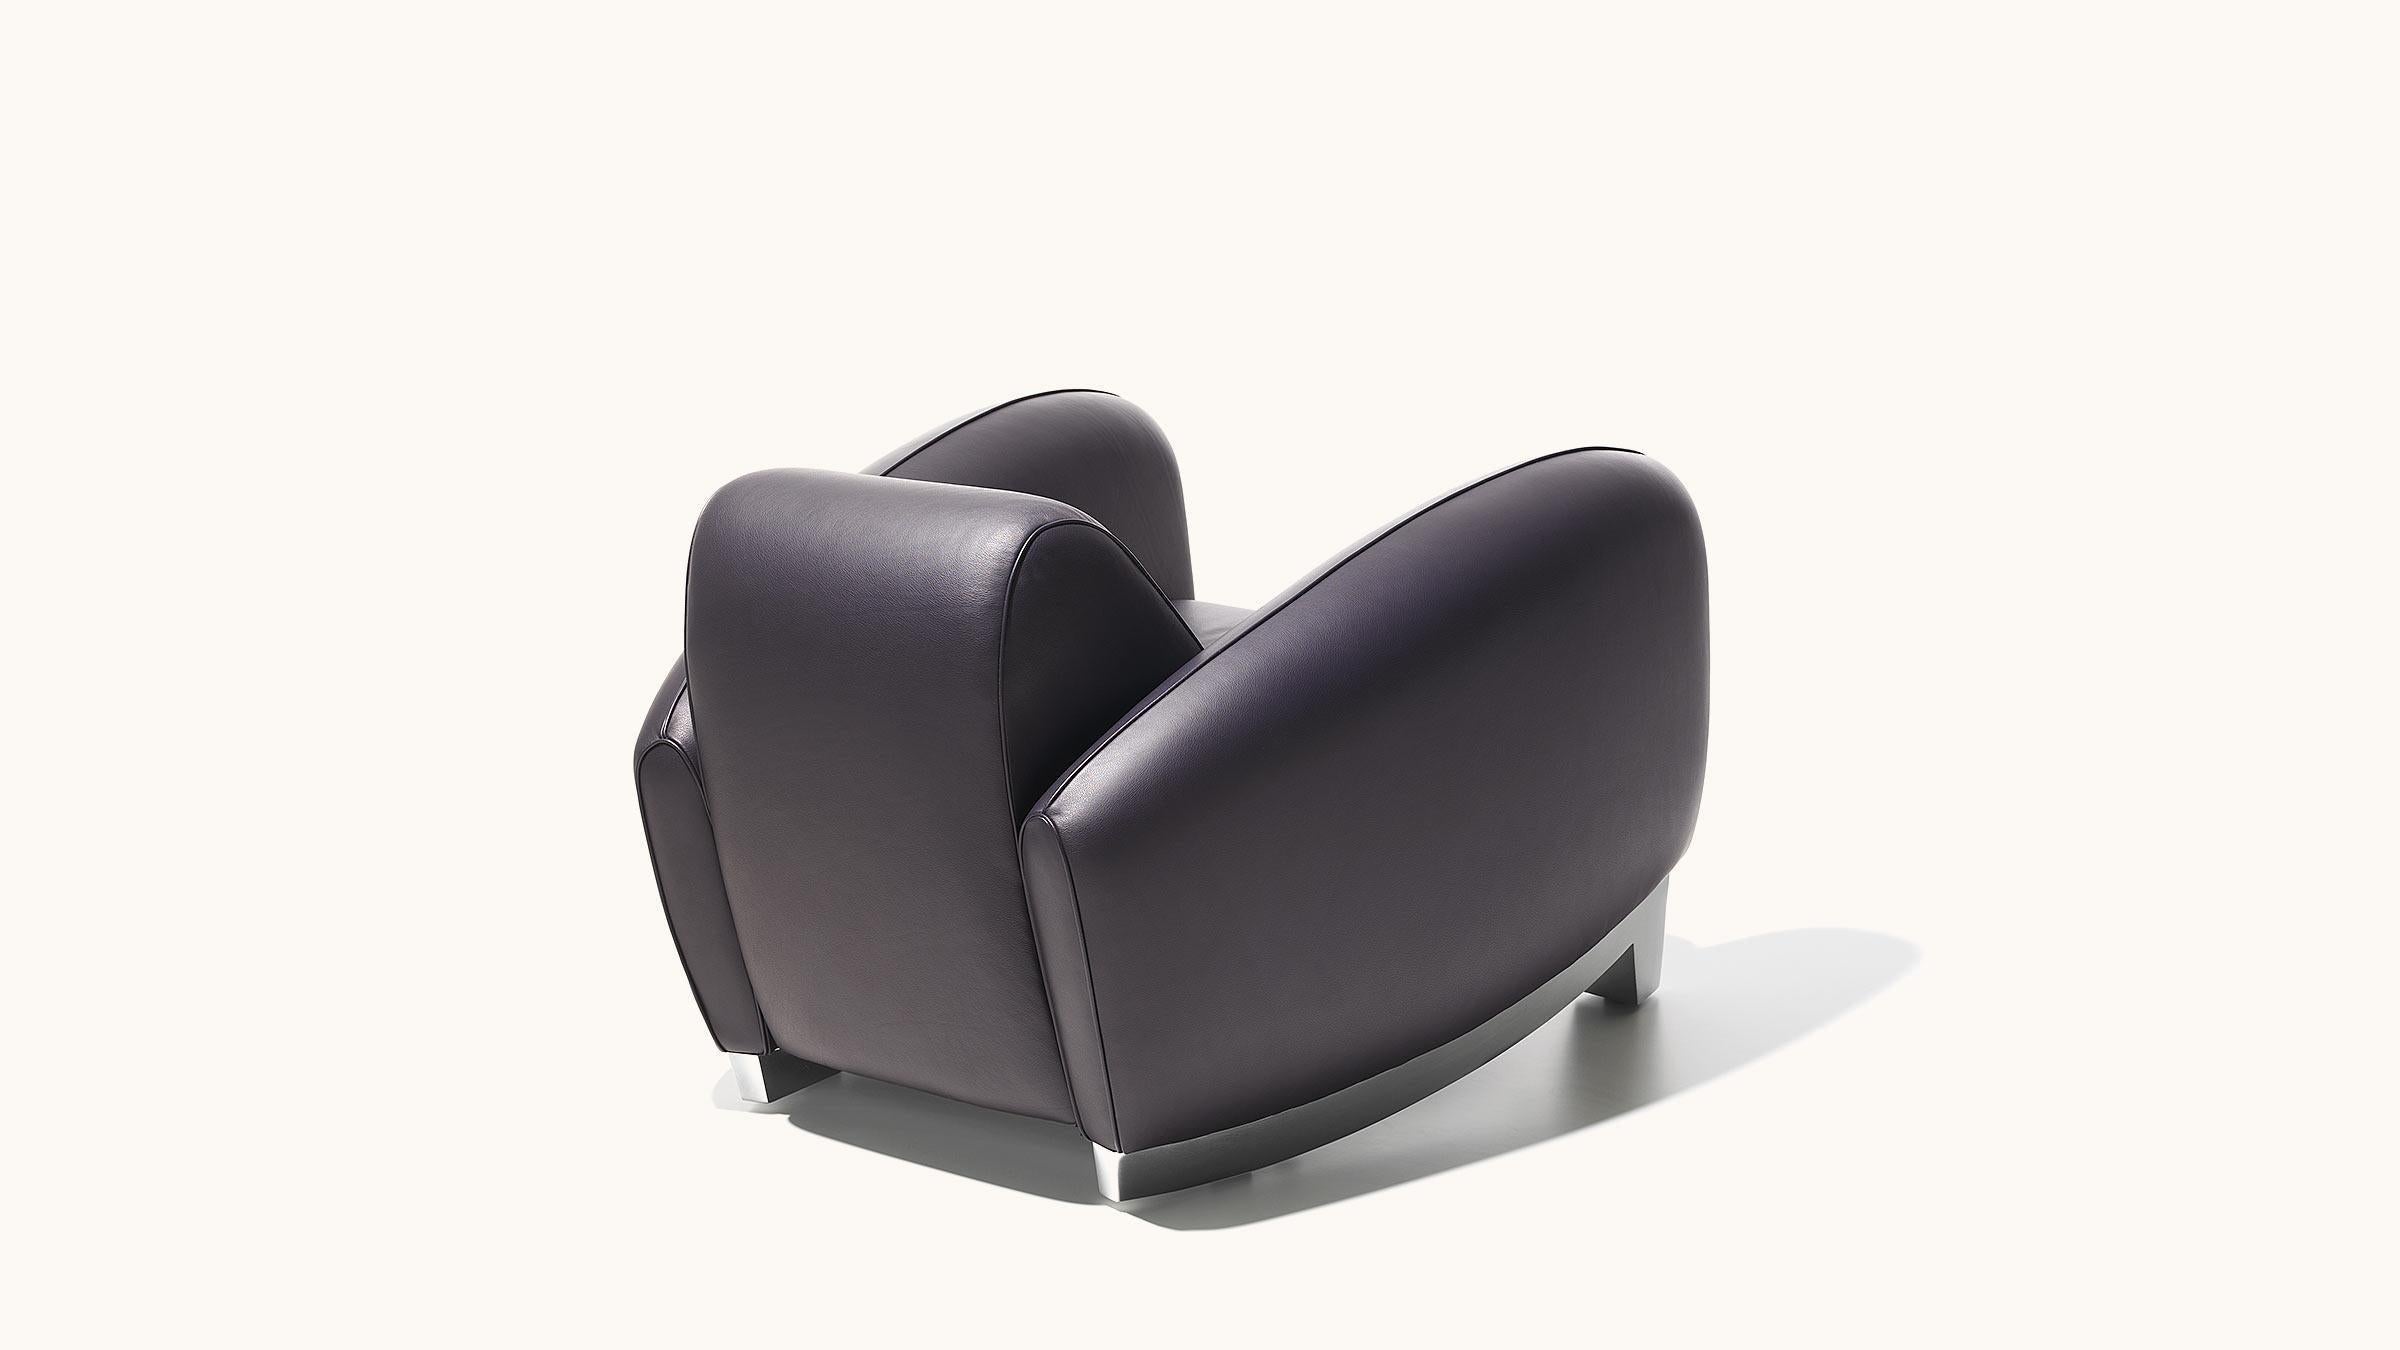 The Bugatti type 57, an icon of Art Deco design, inspired Franz Romero when he designed the DS-57 armchair for De Sede. The designer not only managed to incorporate the characteristic seating comfort of Bugatti car seats; he also accomplished a